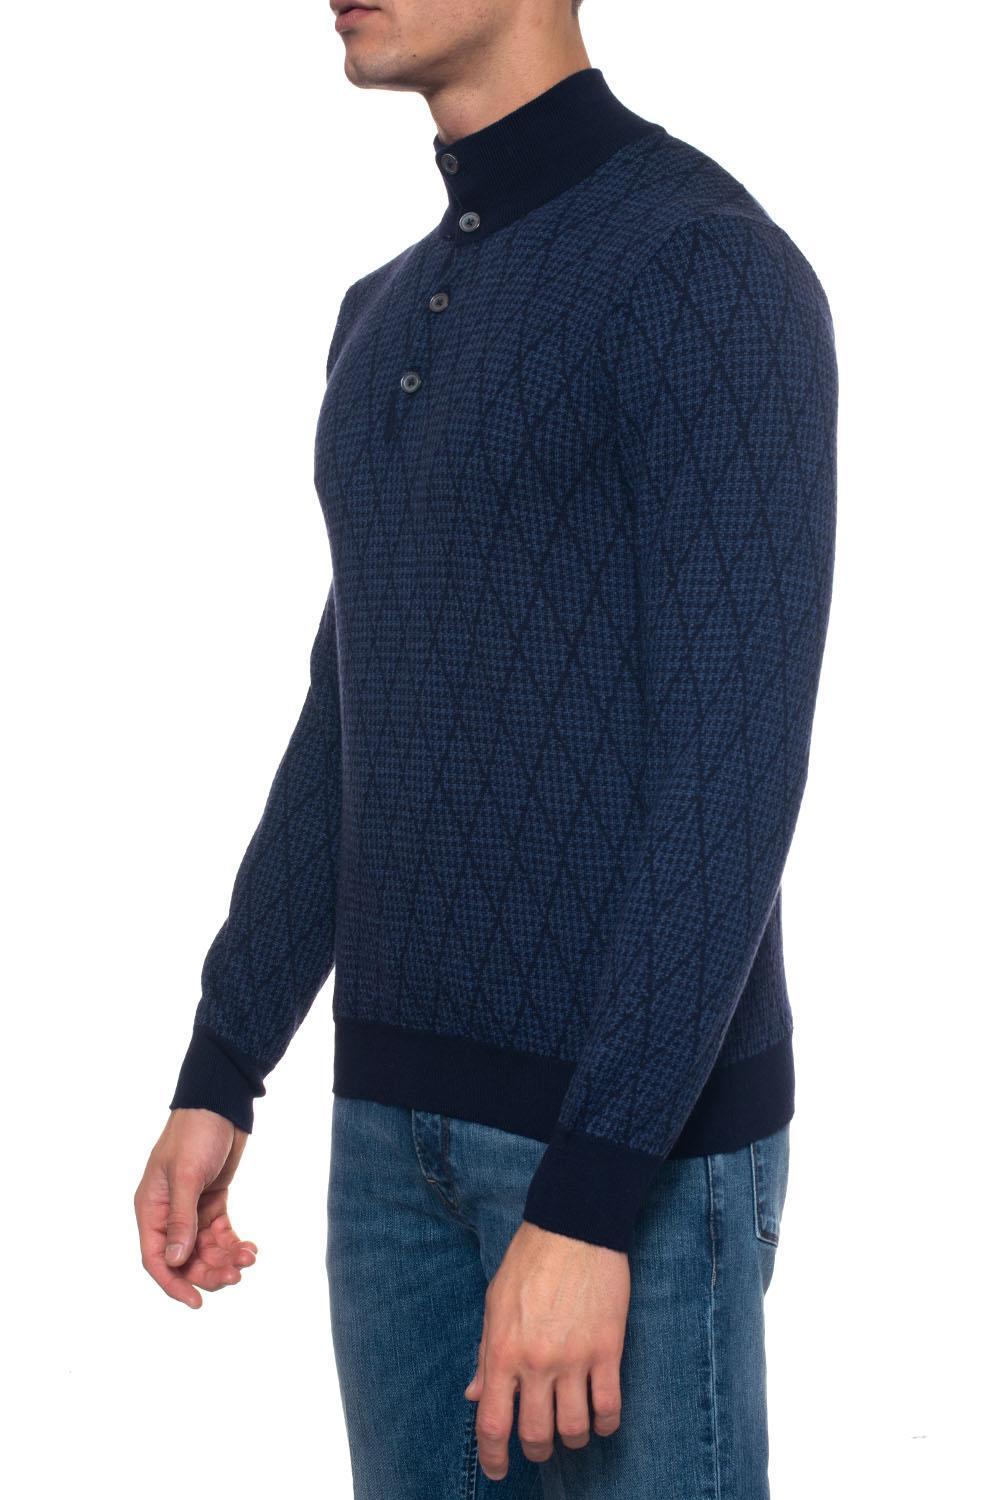 Andrea Fenzi Wool Pullover With 4 Buttons in Blue for Men - Lyst